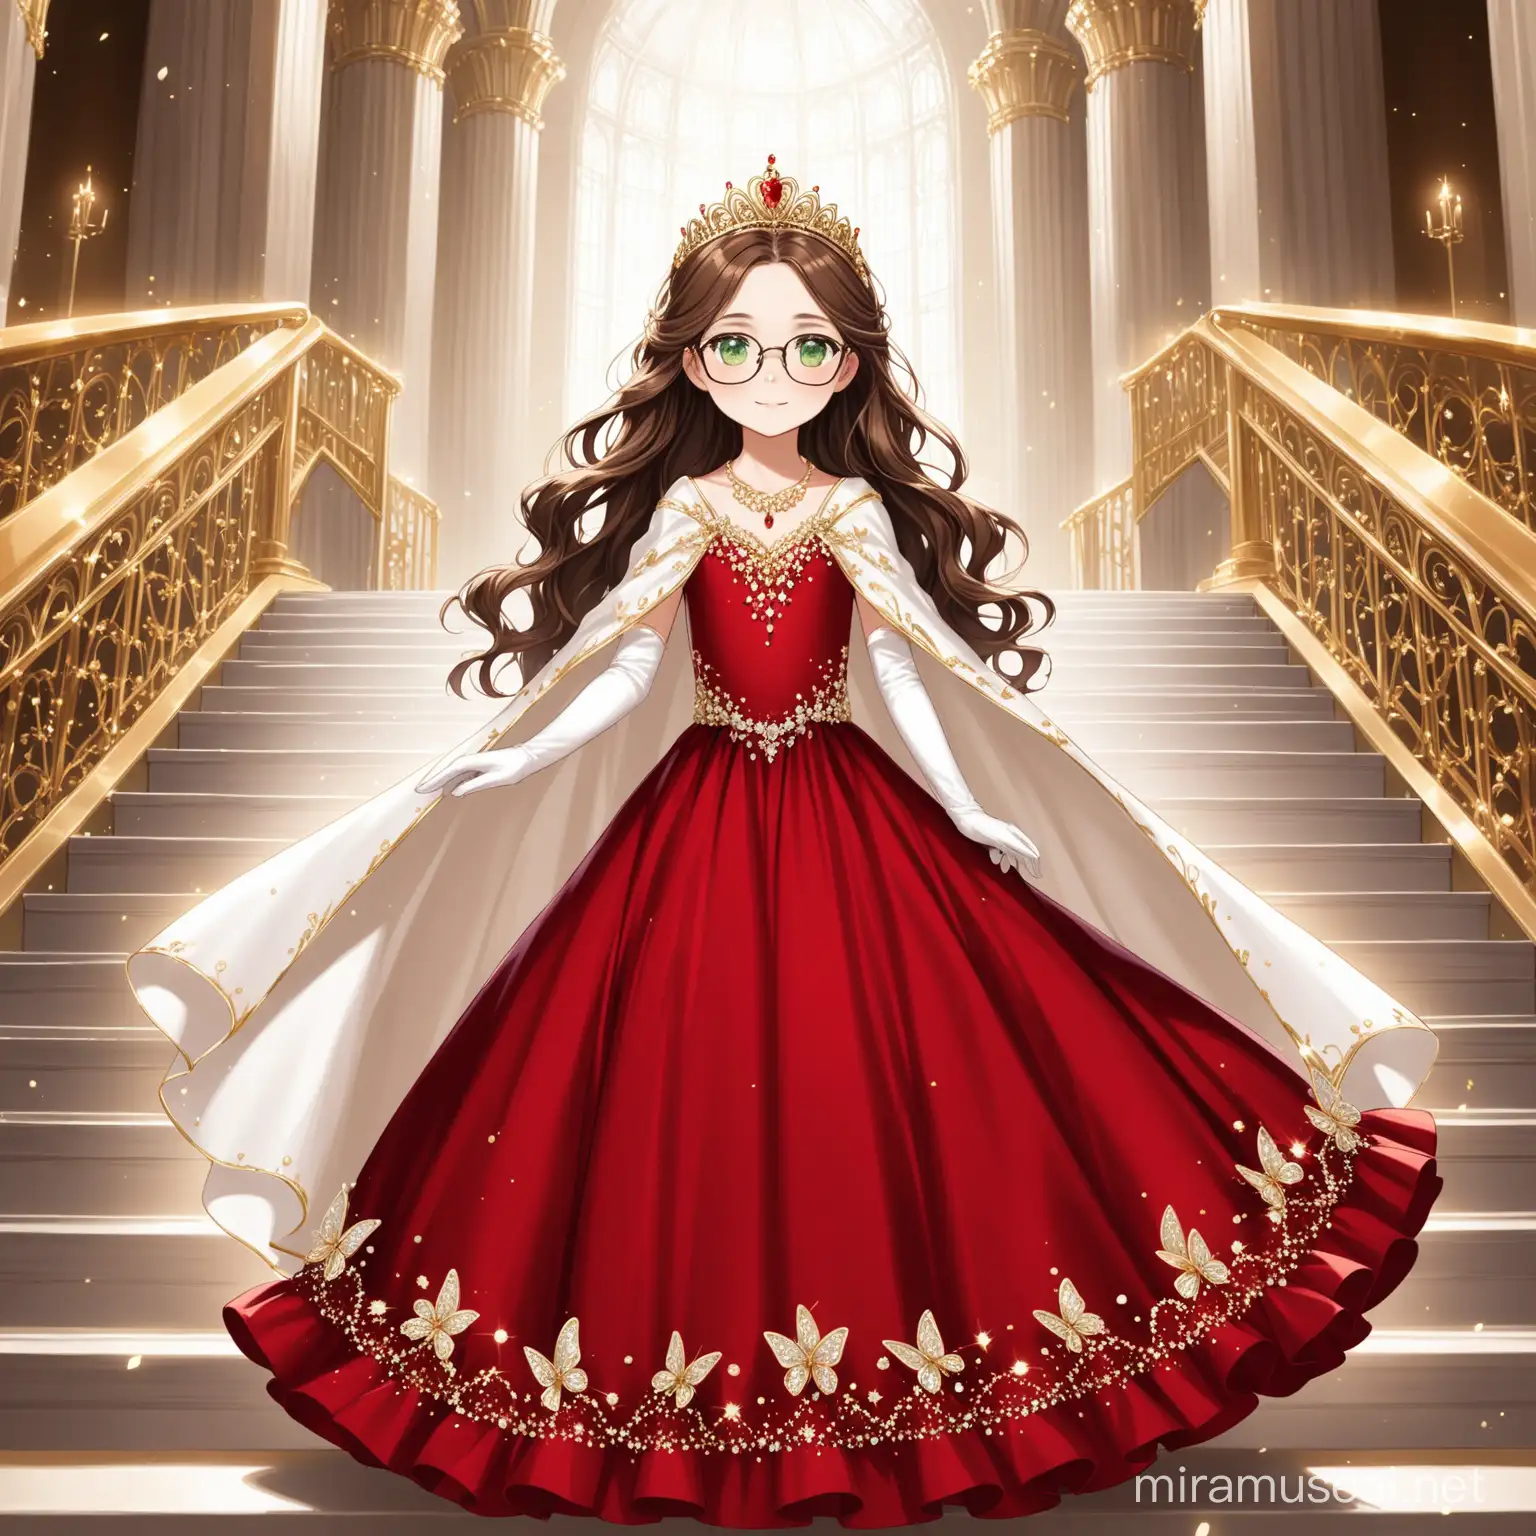 Elegant 11YearOld Girl in Red Ball Gown with Butterfly Accents on Grand Staircase